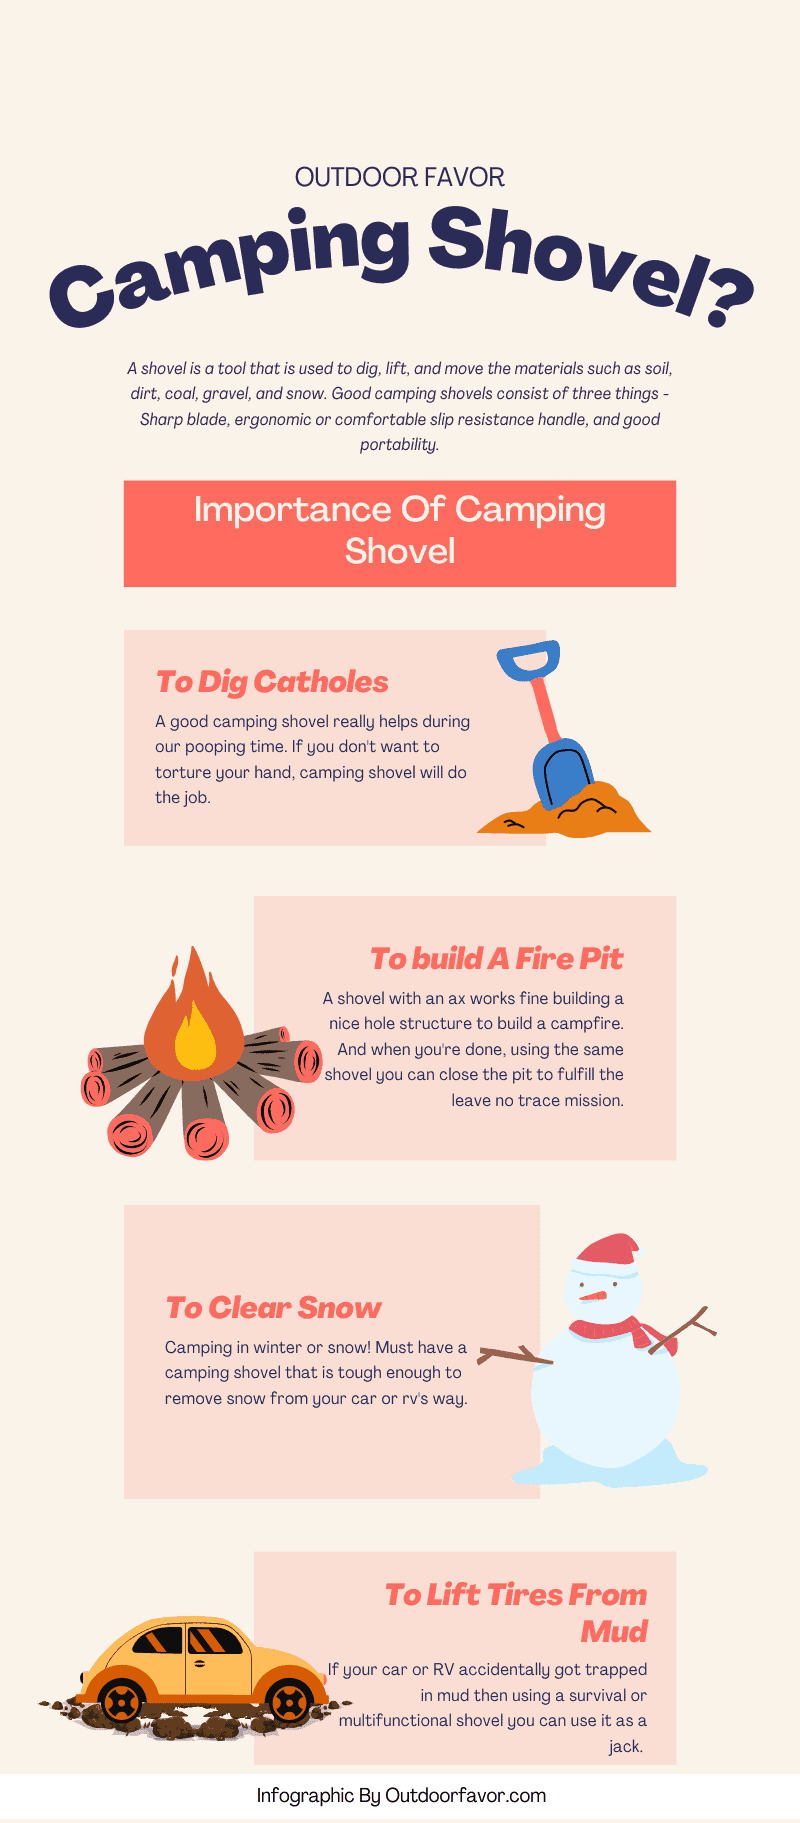 Why do you need a shovel for camping? Explained using a inforgraphic